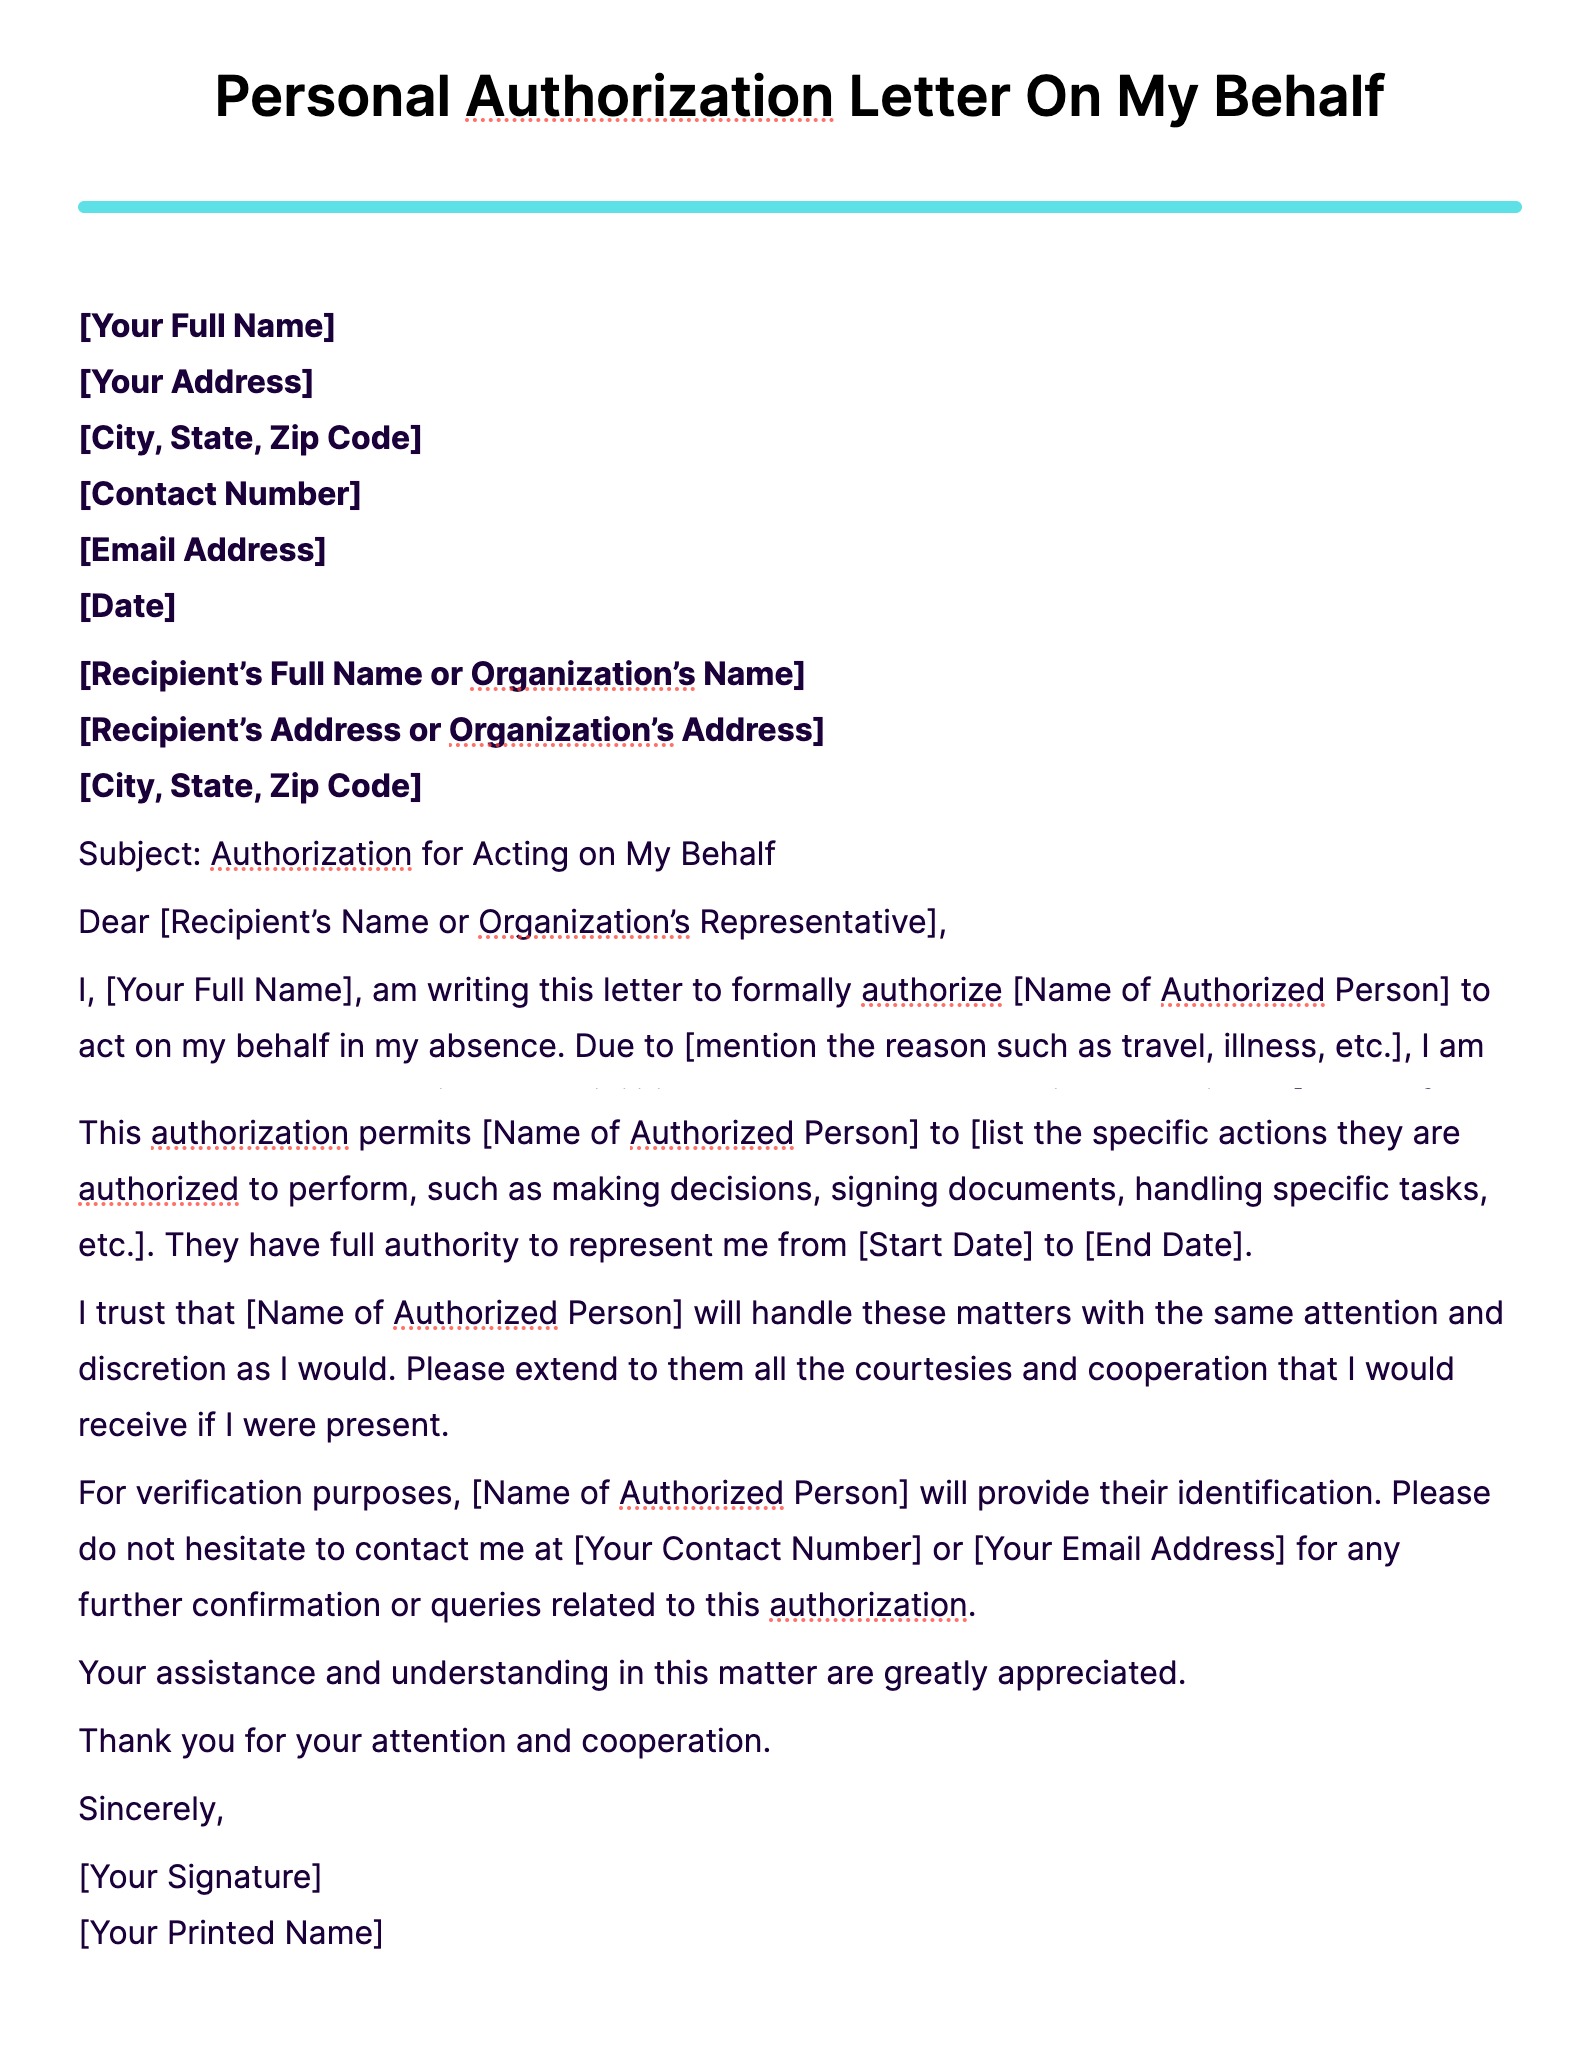 Personal Authorization Letter On My Behalf